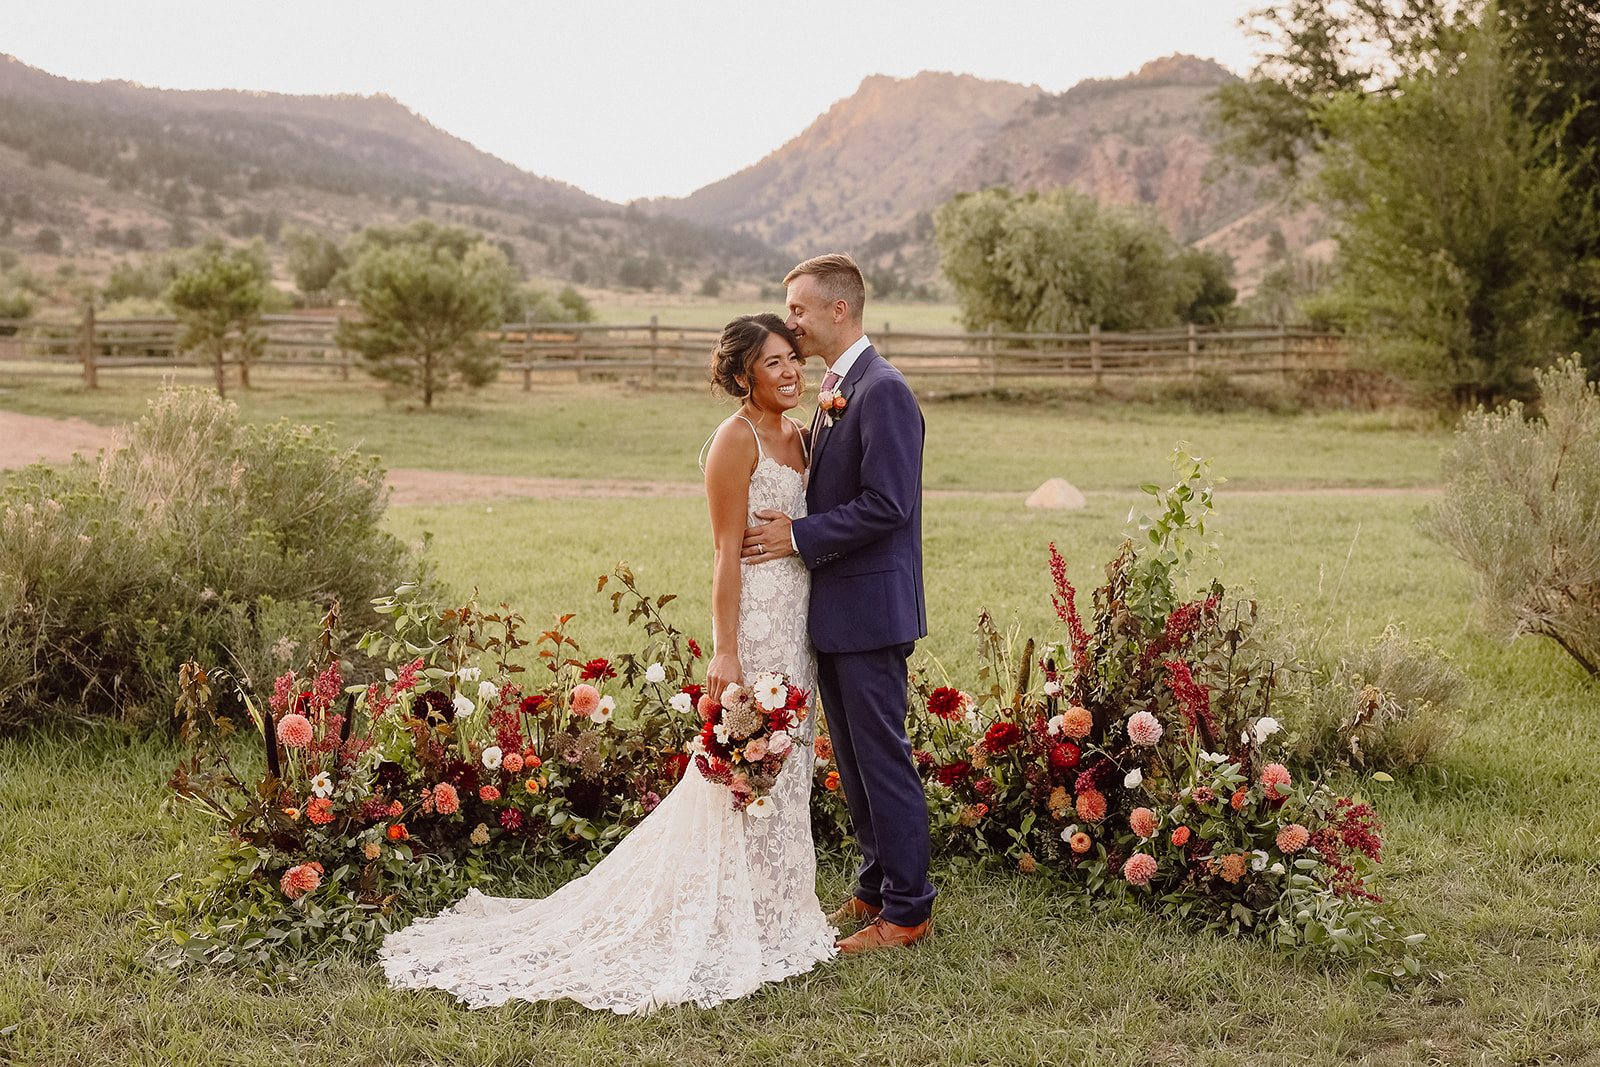 Man and woman holding each other and smiling during a Rocky Mountain Bride Styled Editorial